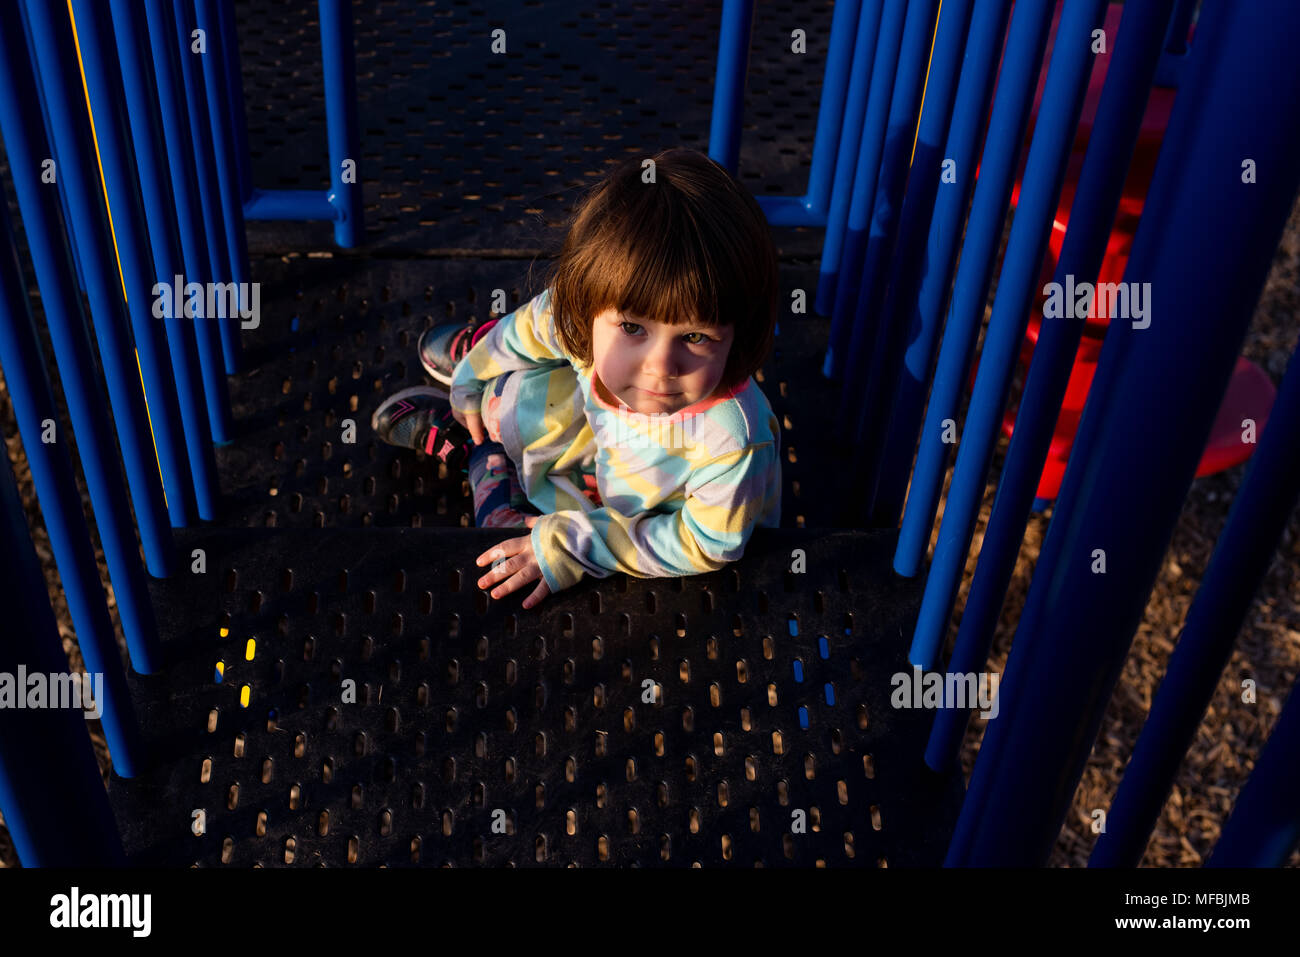 A 3-year old girl on a playground equipment on a summer day. Stock Photo